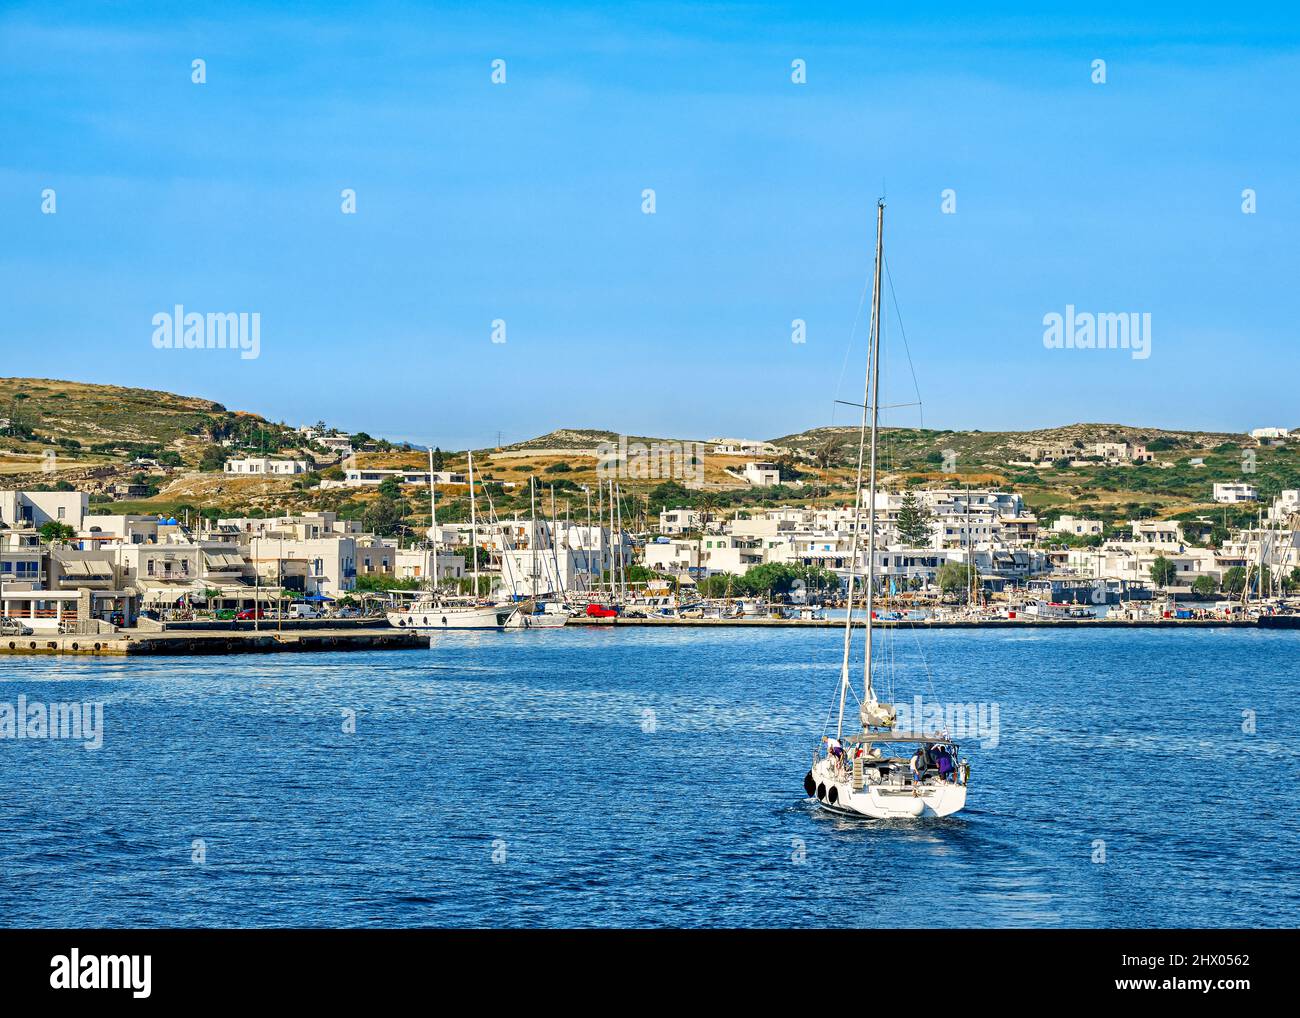 Sailboat going to port of Greek island. Yachts and fishing boats in harbor at sunny summer day. Whitewashed houses on green hills. Stock Photo